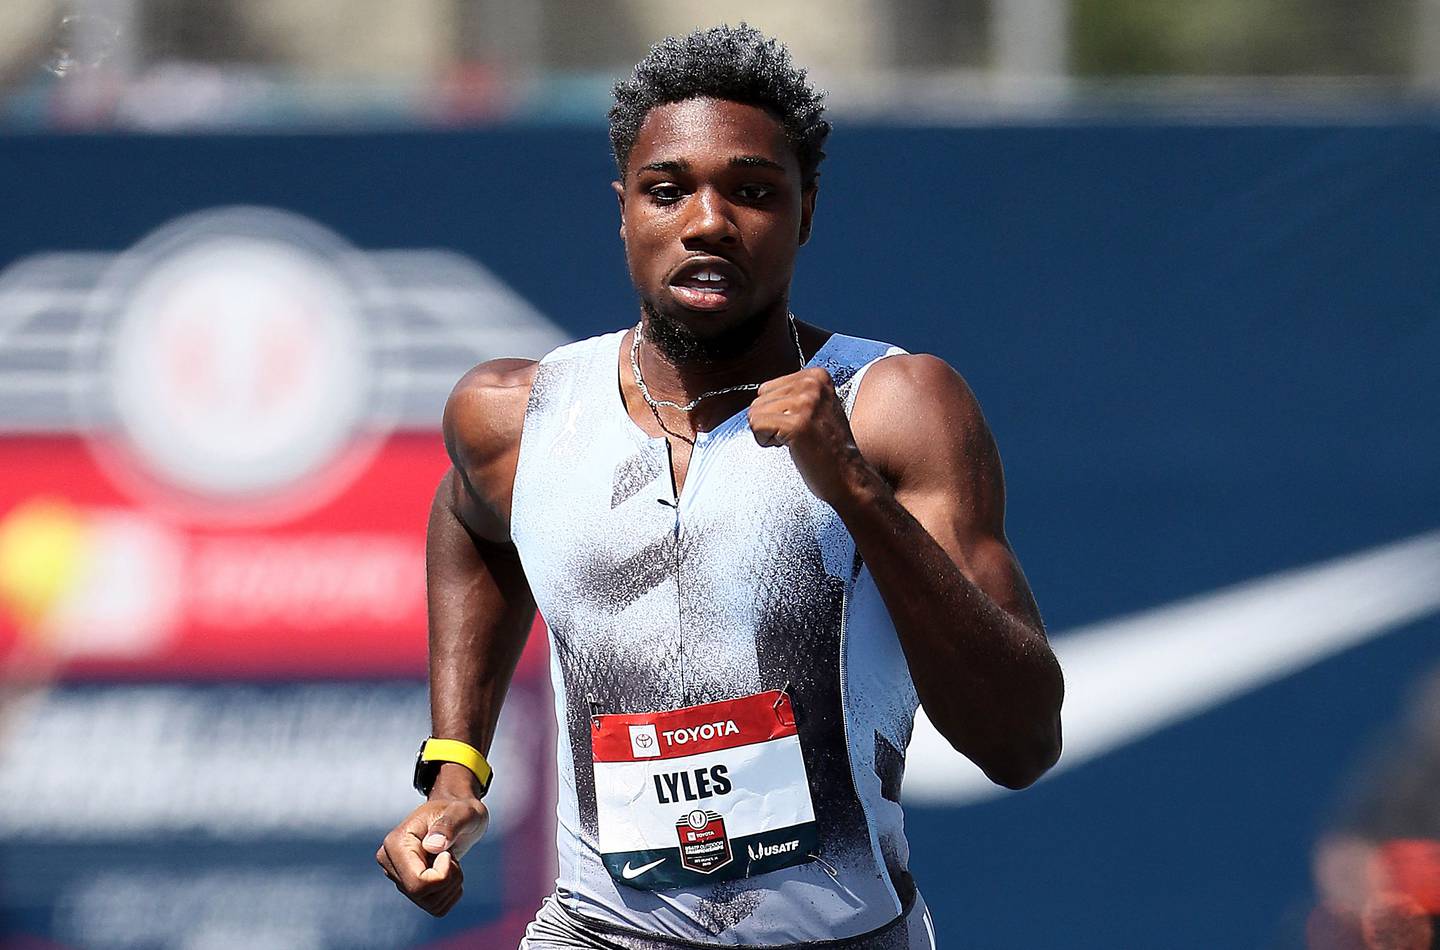 The American Noah Lyles is the current world champion in the 200 metres and favourite to win the event in Tokyo. 